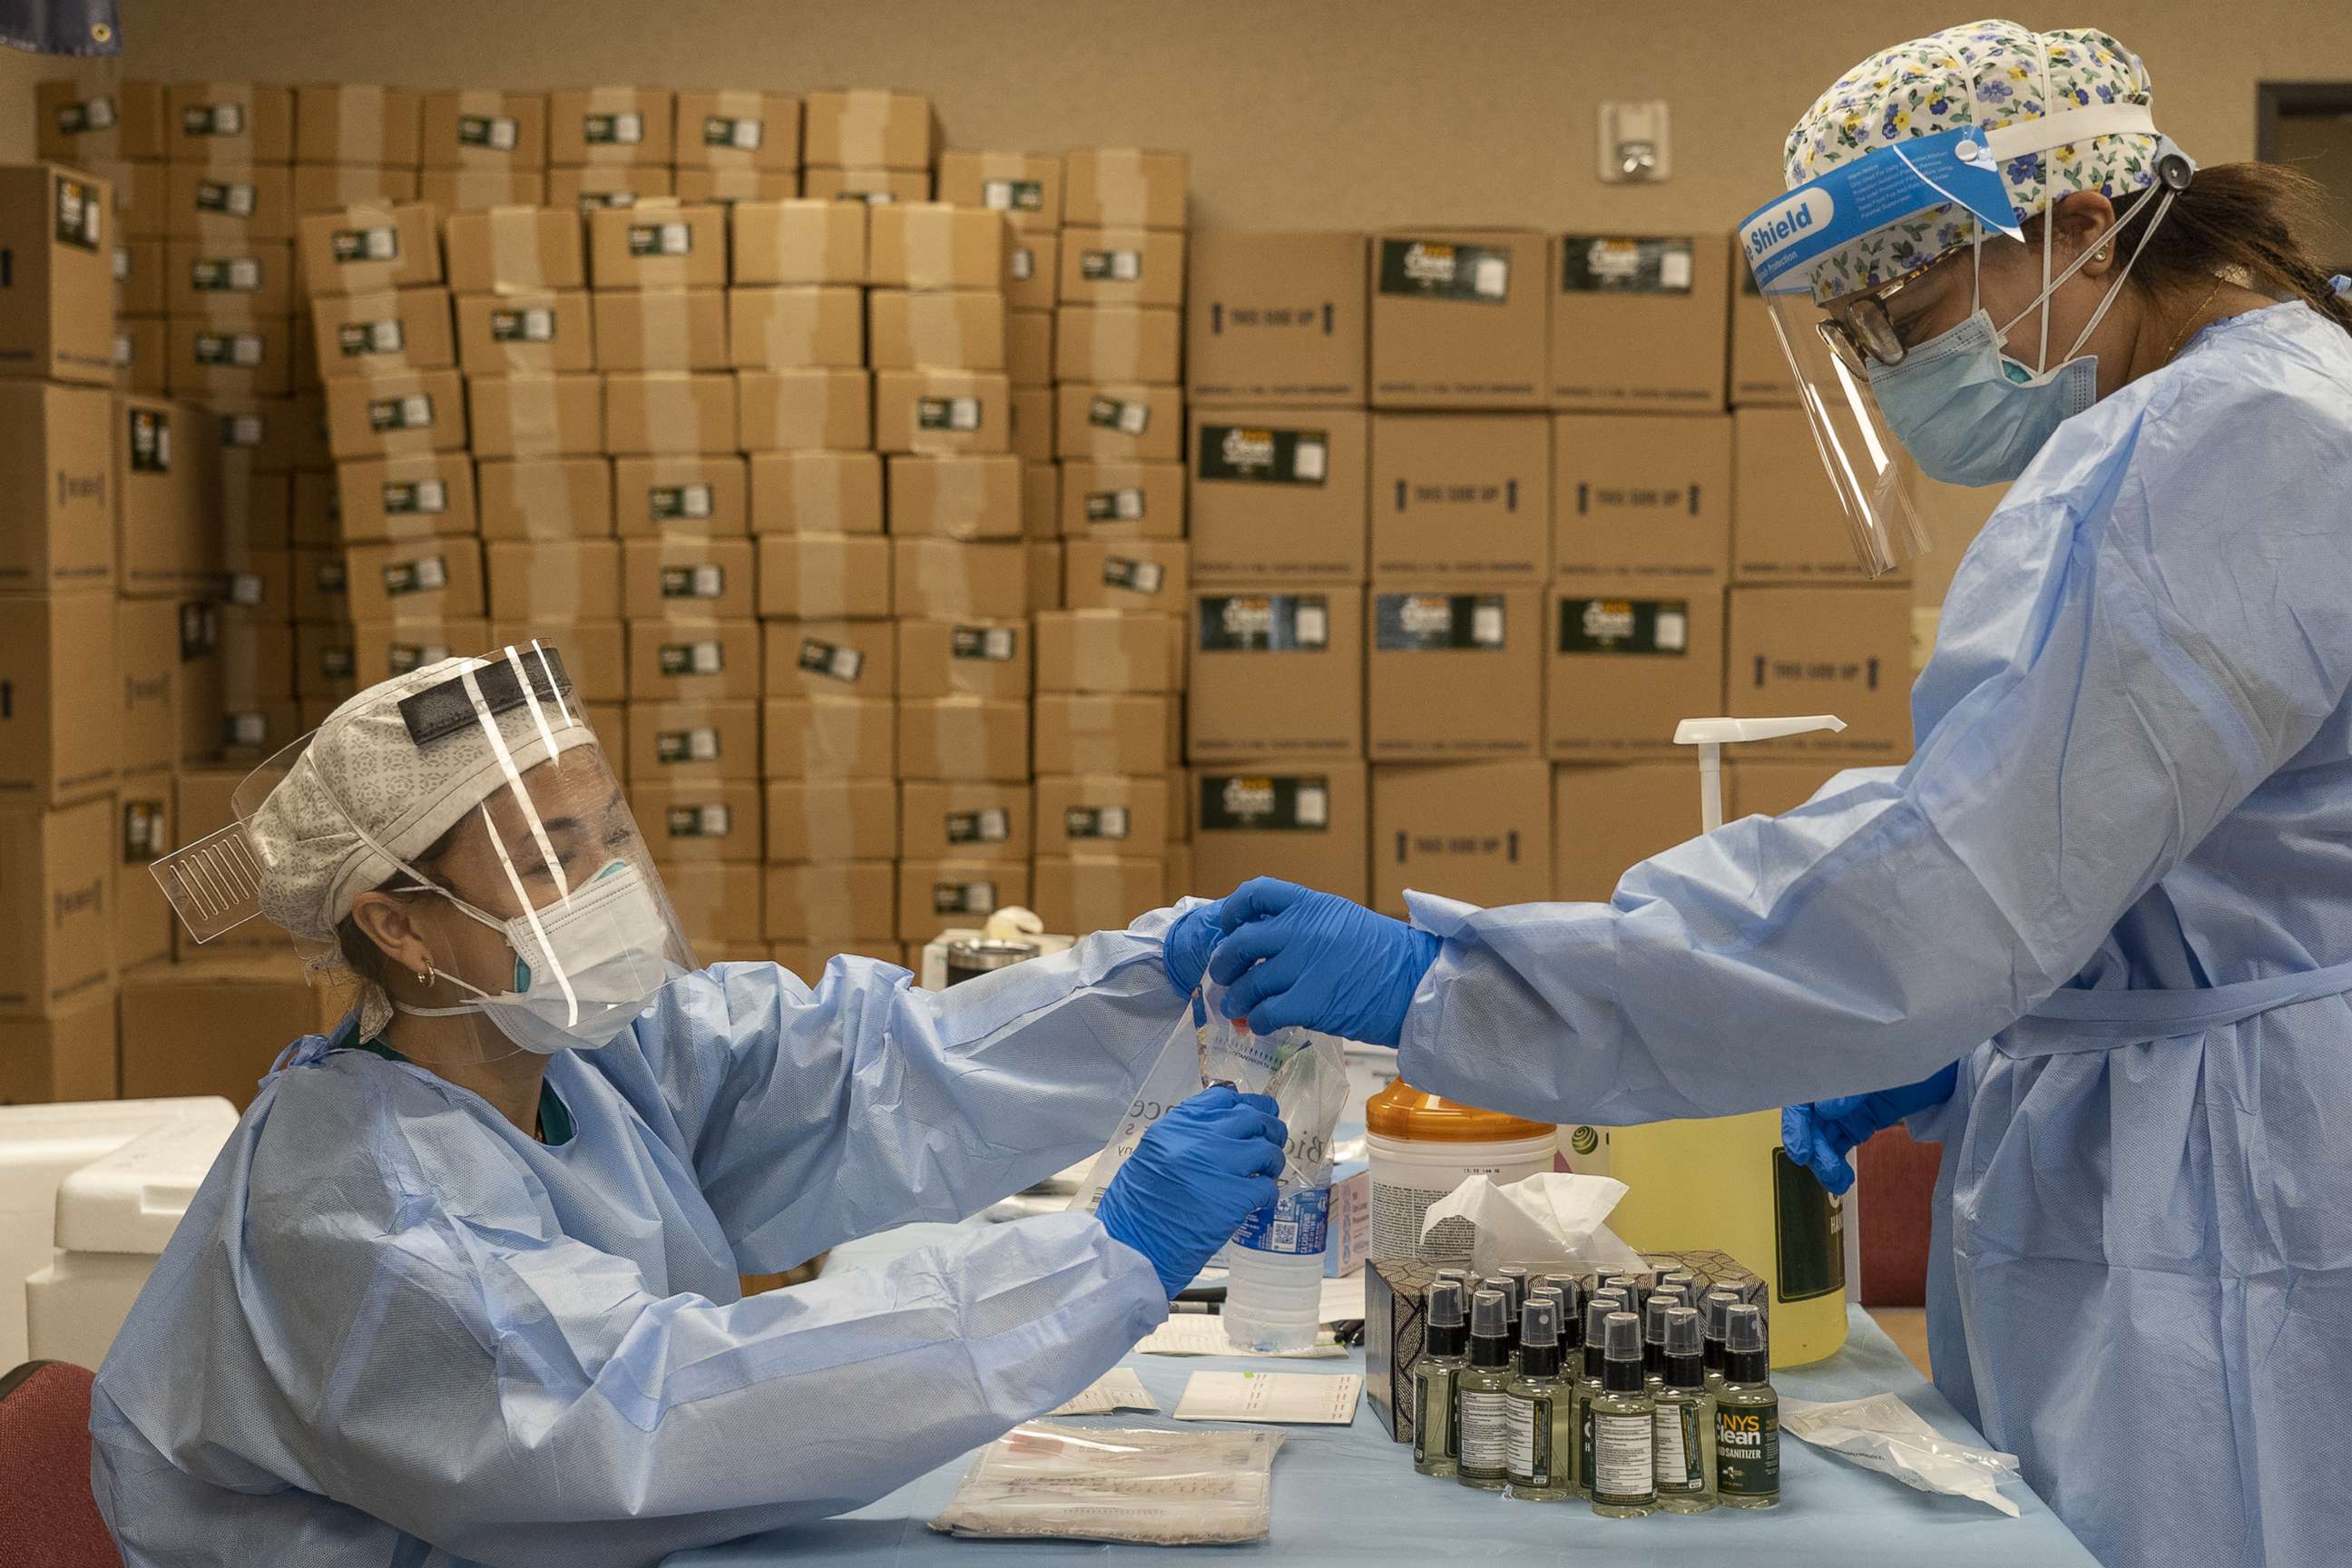 PHOTO: Medical workers from New York wearing personal protective equipments handle test samples at temporary testing site for COVID-19 in Higher Dimensions Church, July 17, 2020, in Houston.